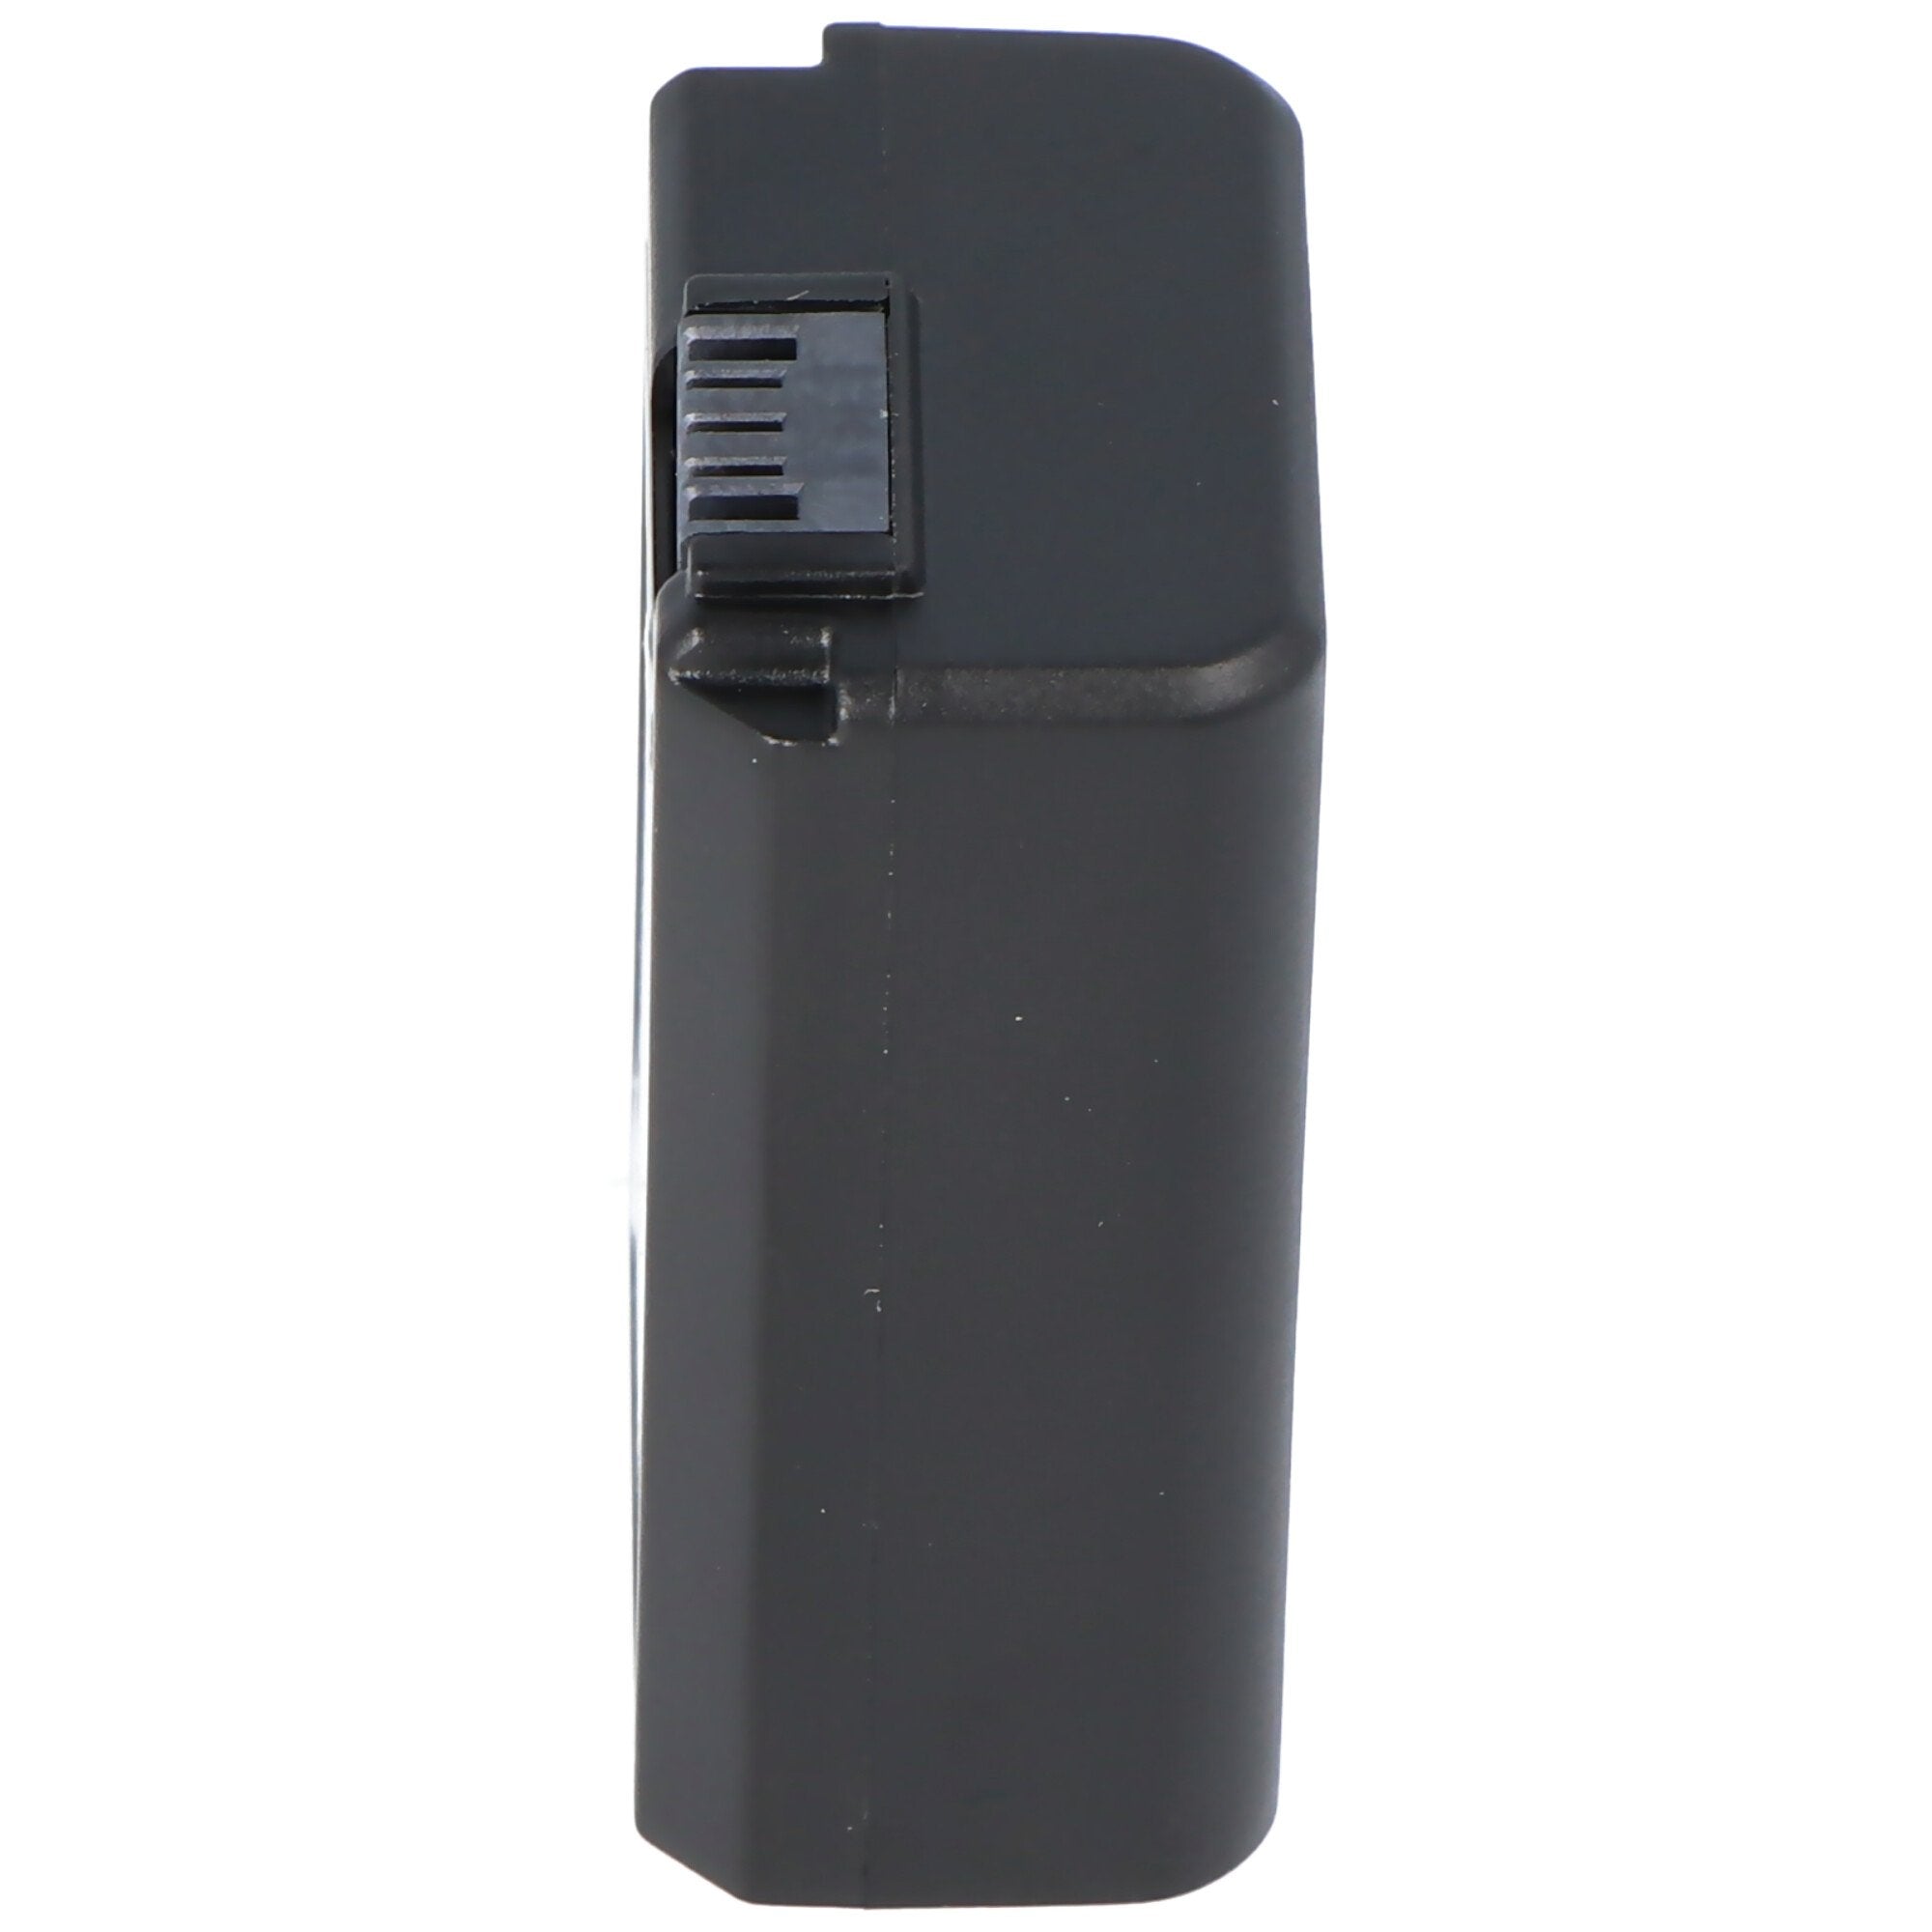 AccuCell battery suitable for Sony NP-FW50 battery NEX-3, NEX-5, Alpha 55